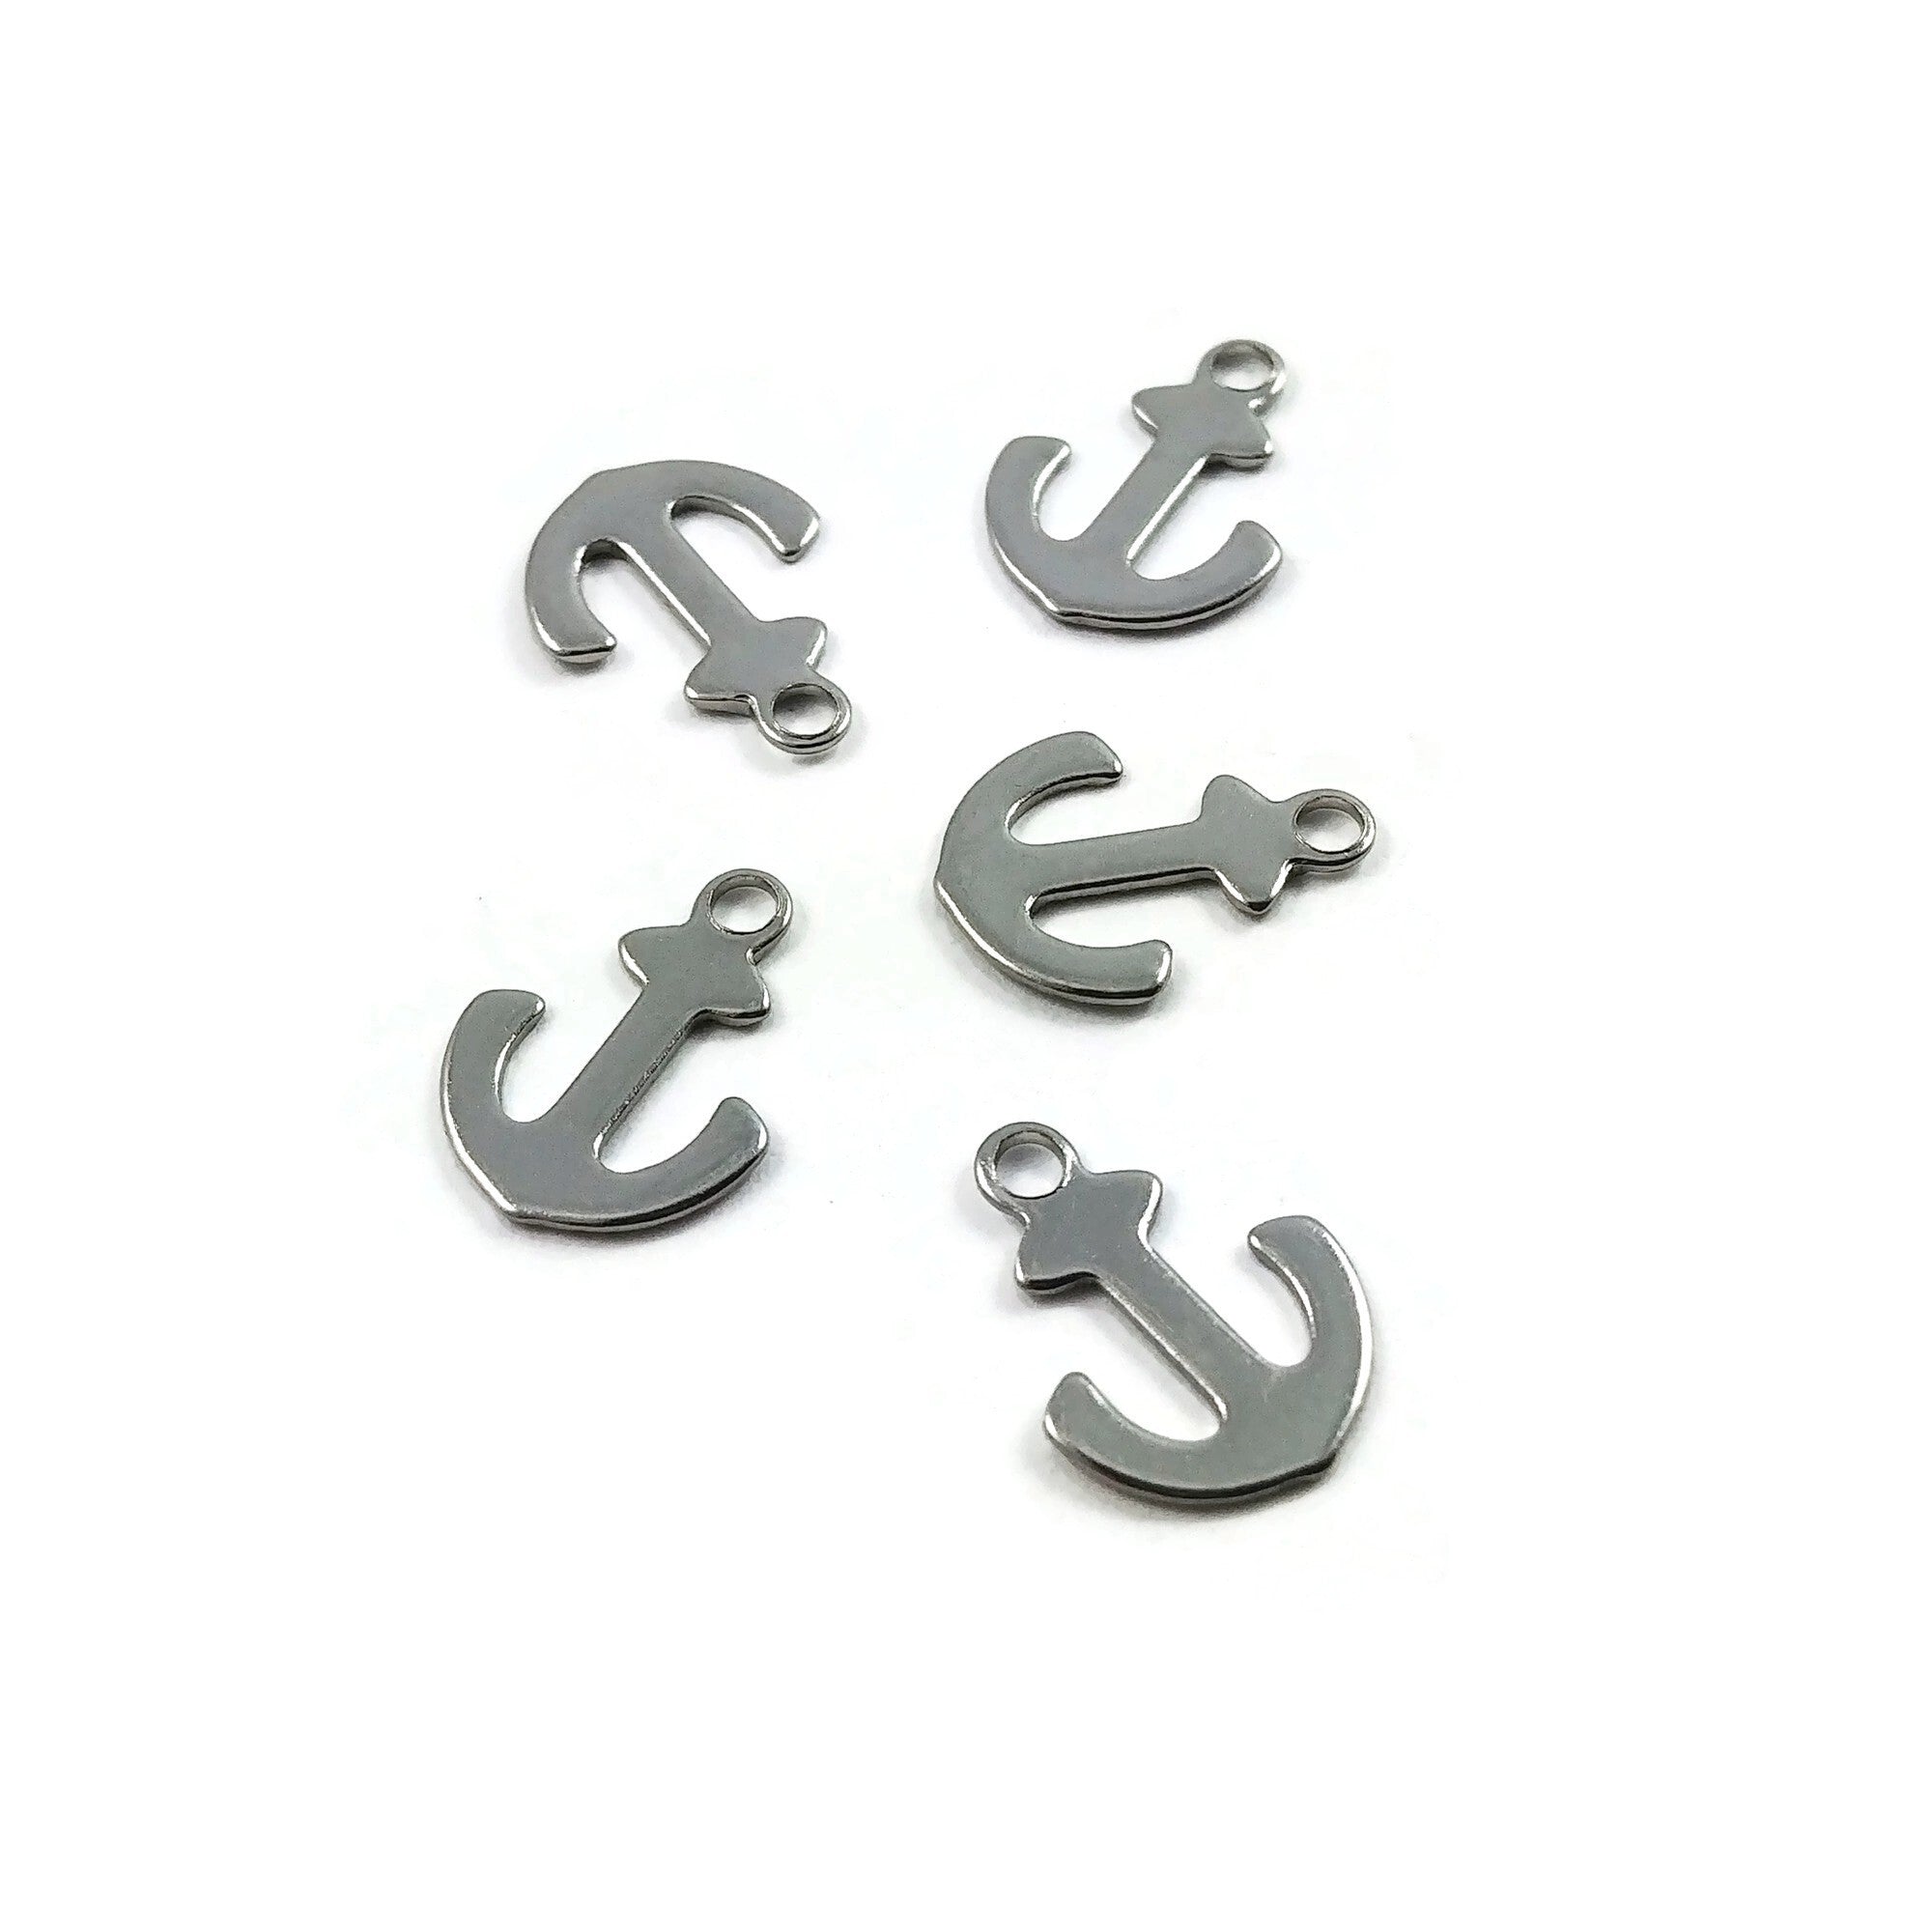 Anchor charms stainless steel hypoallergenic charms 5pcs